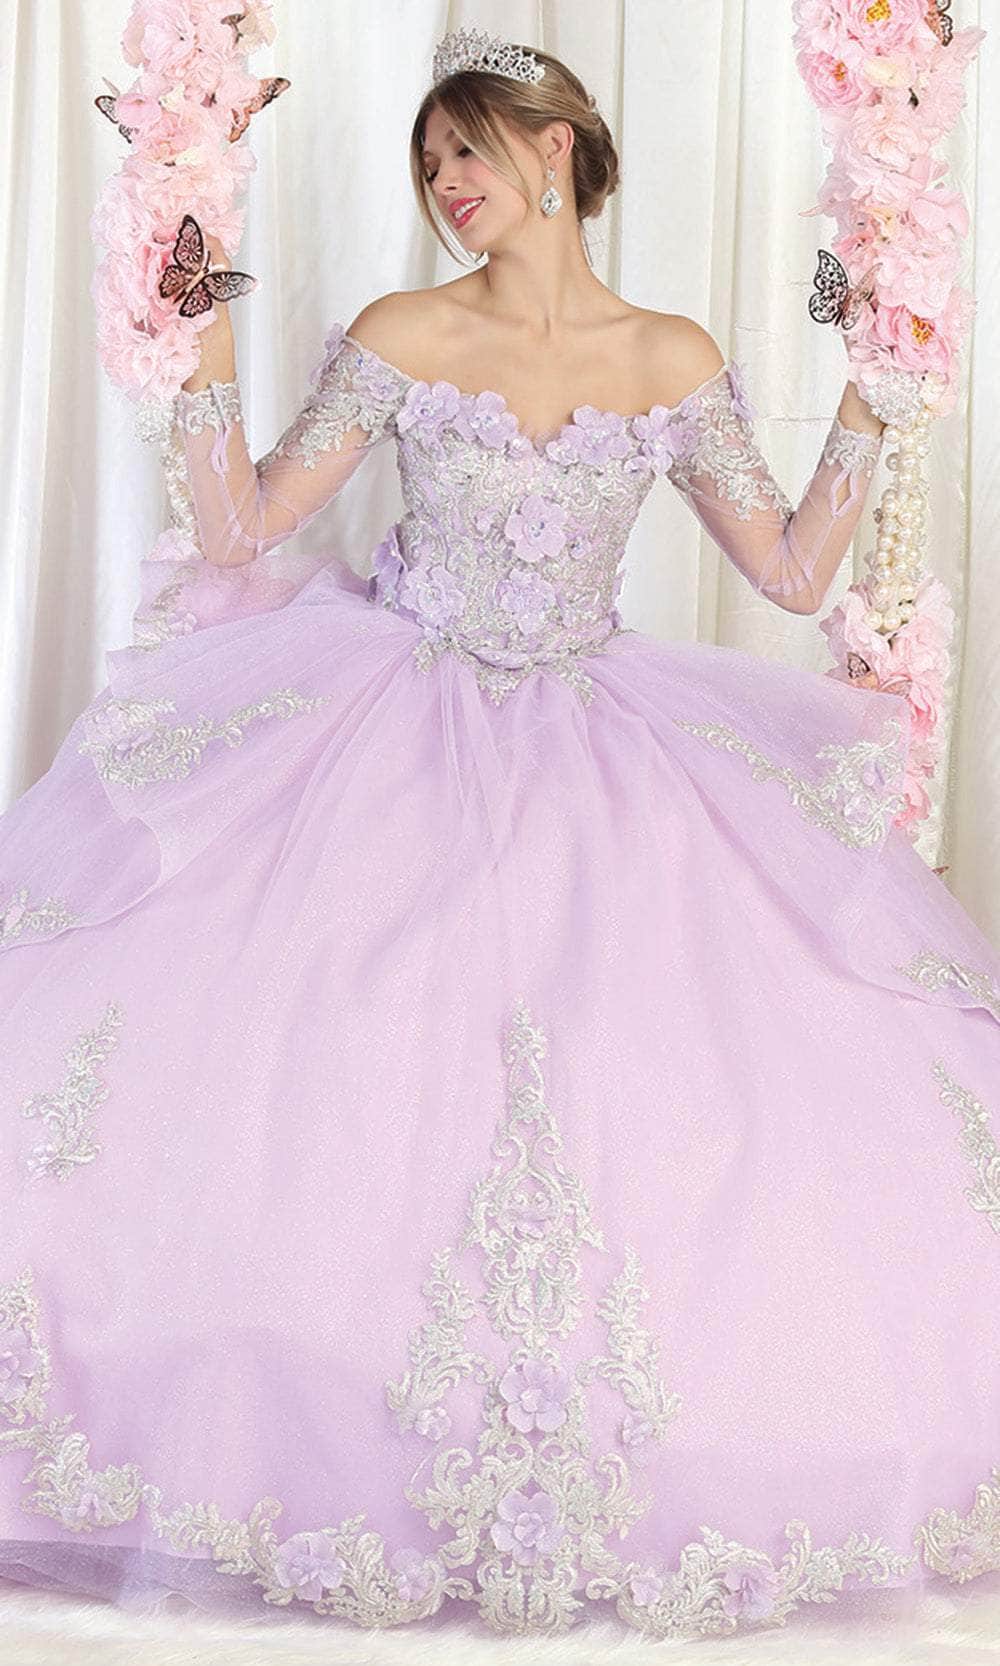 Image of May Queen LK189 - Long Mesh Sleeve Ball Gown